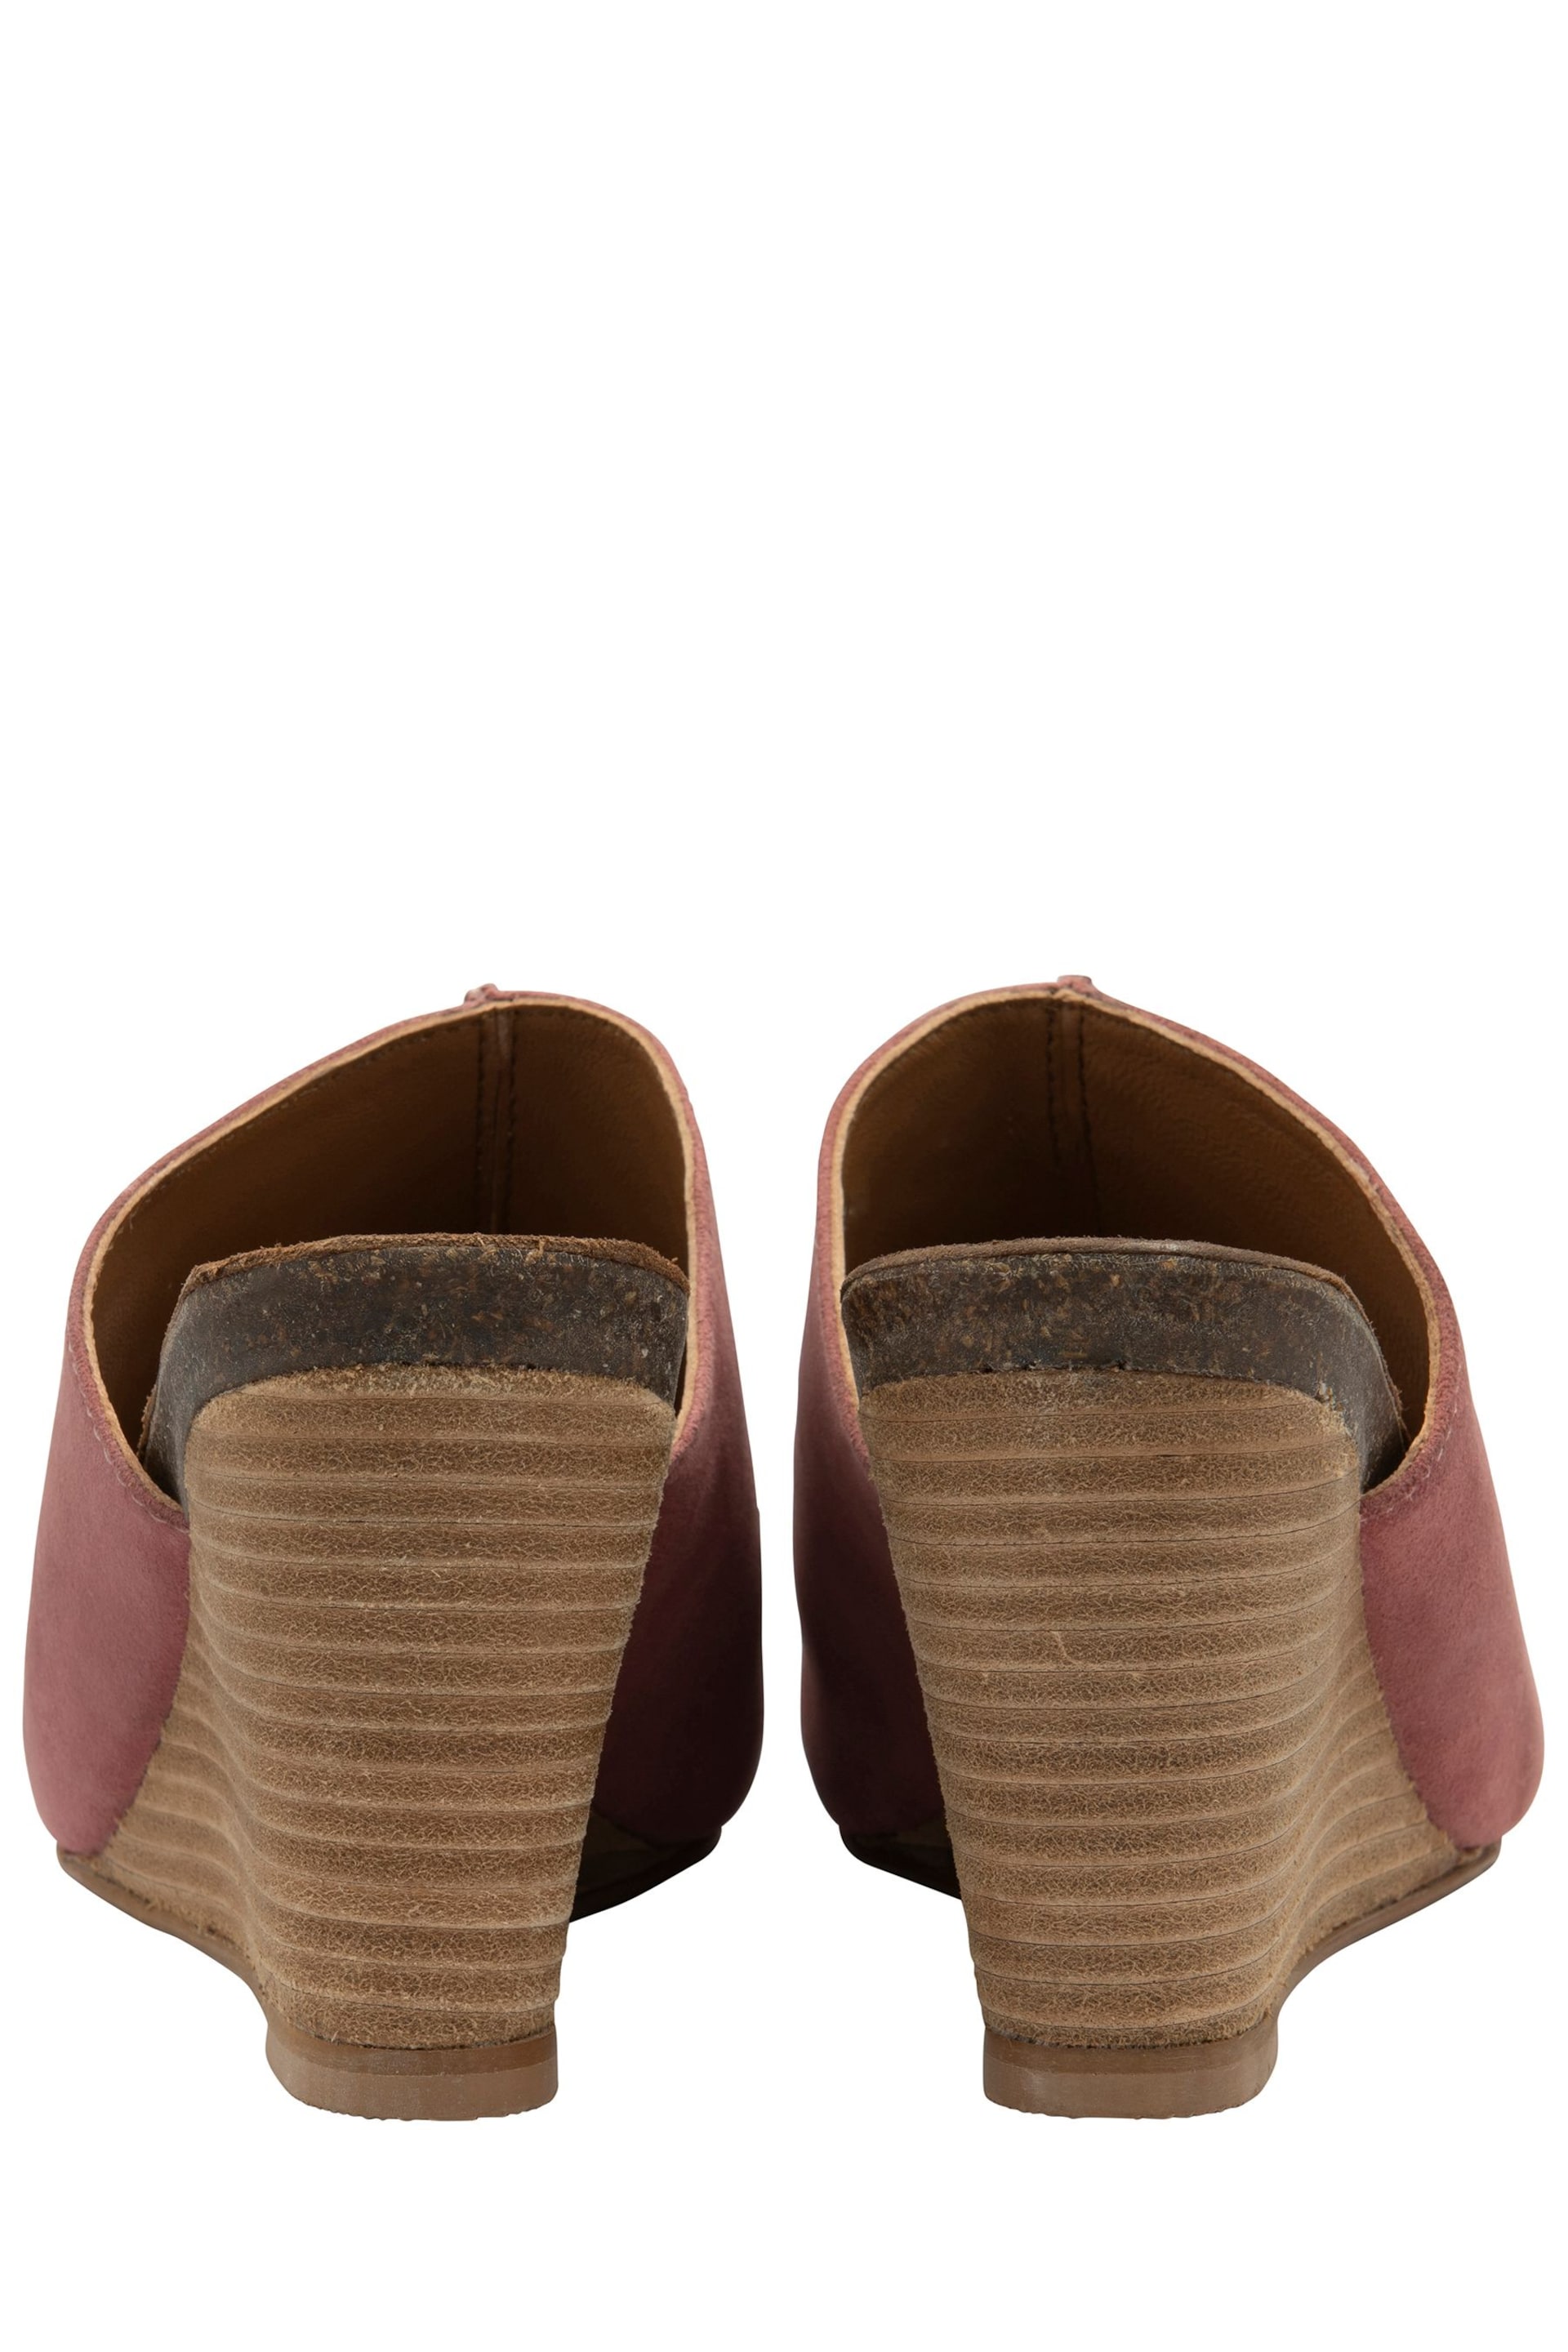 Ravel Pink Leather Mule Wedge Sandals - Image 3 of 4